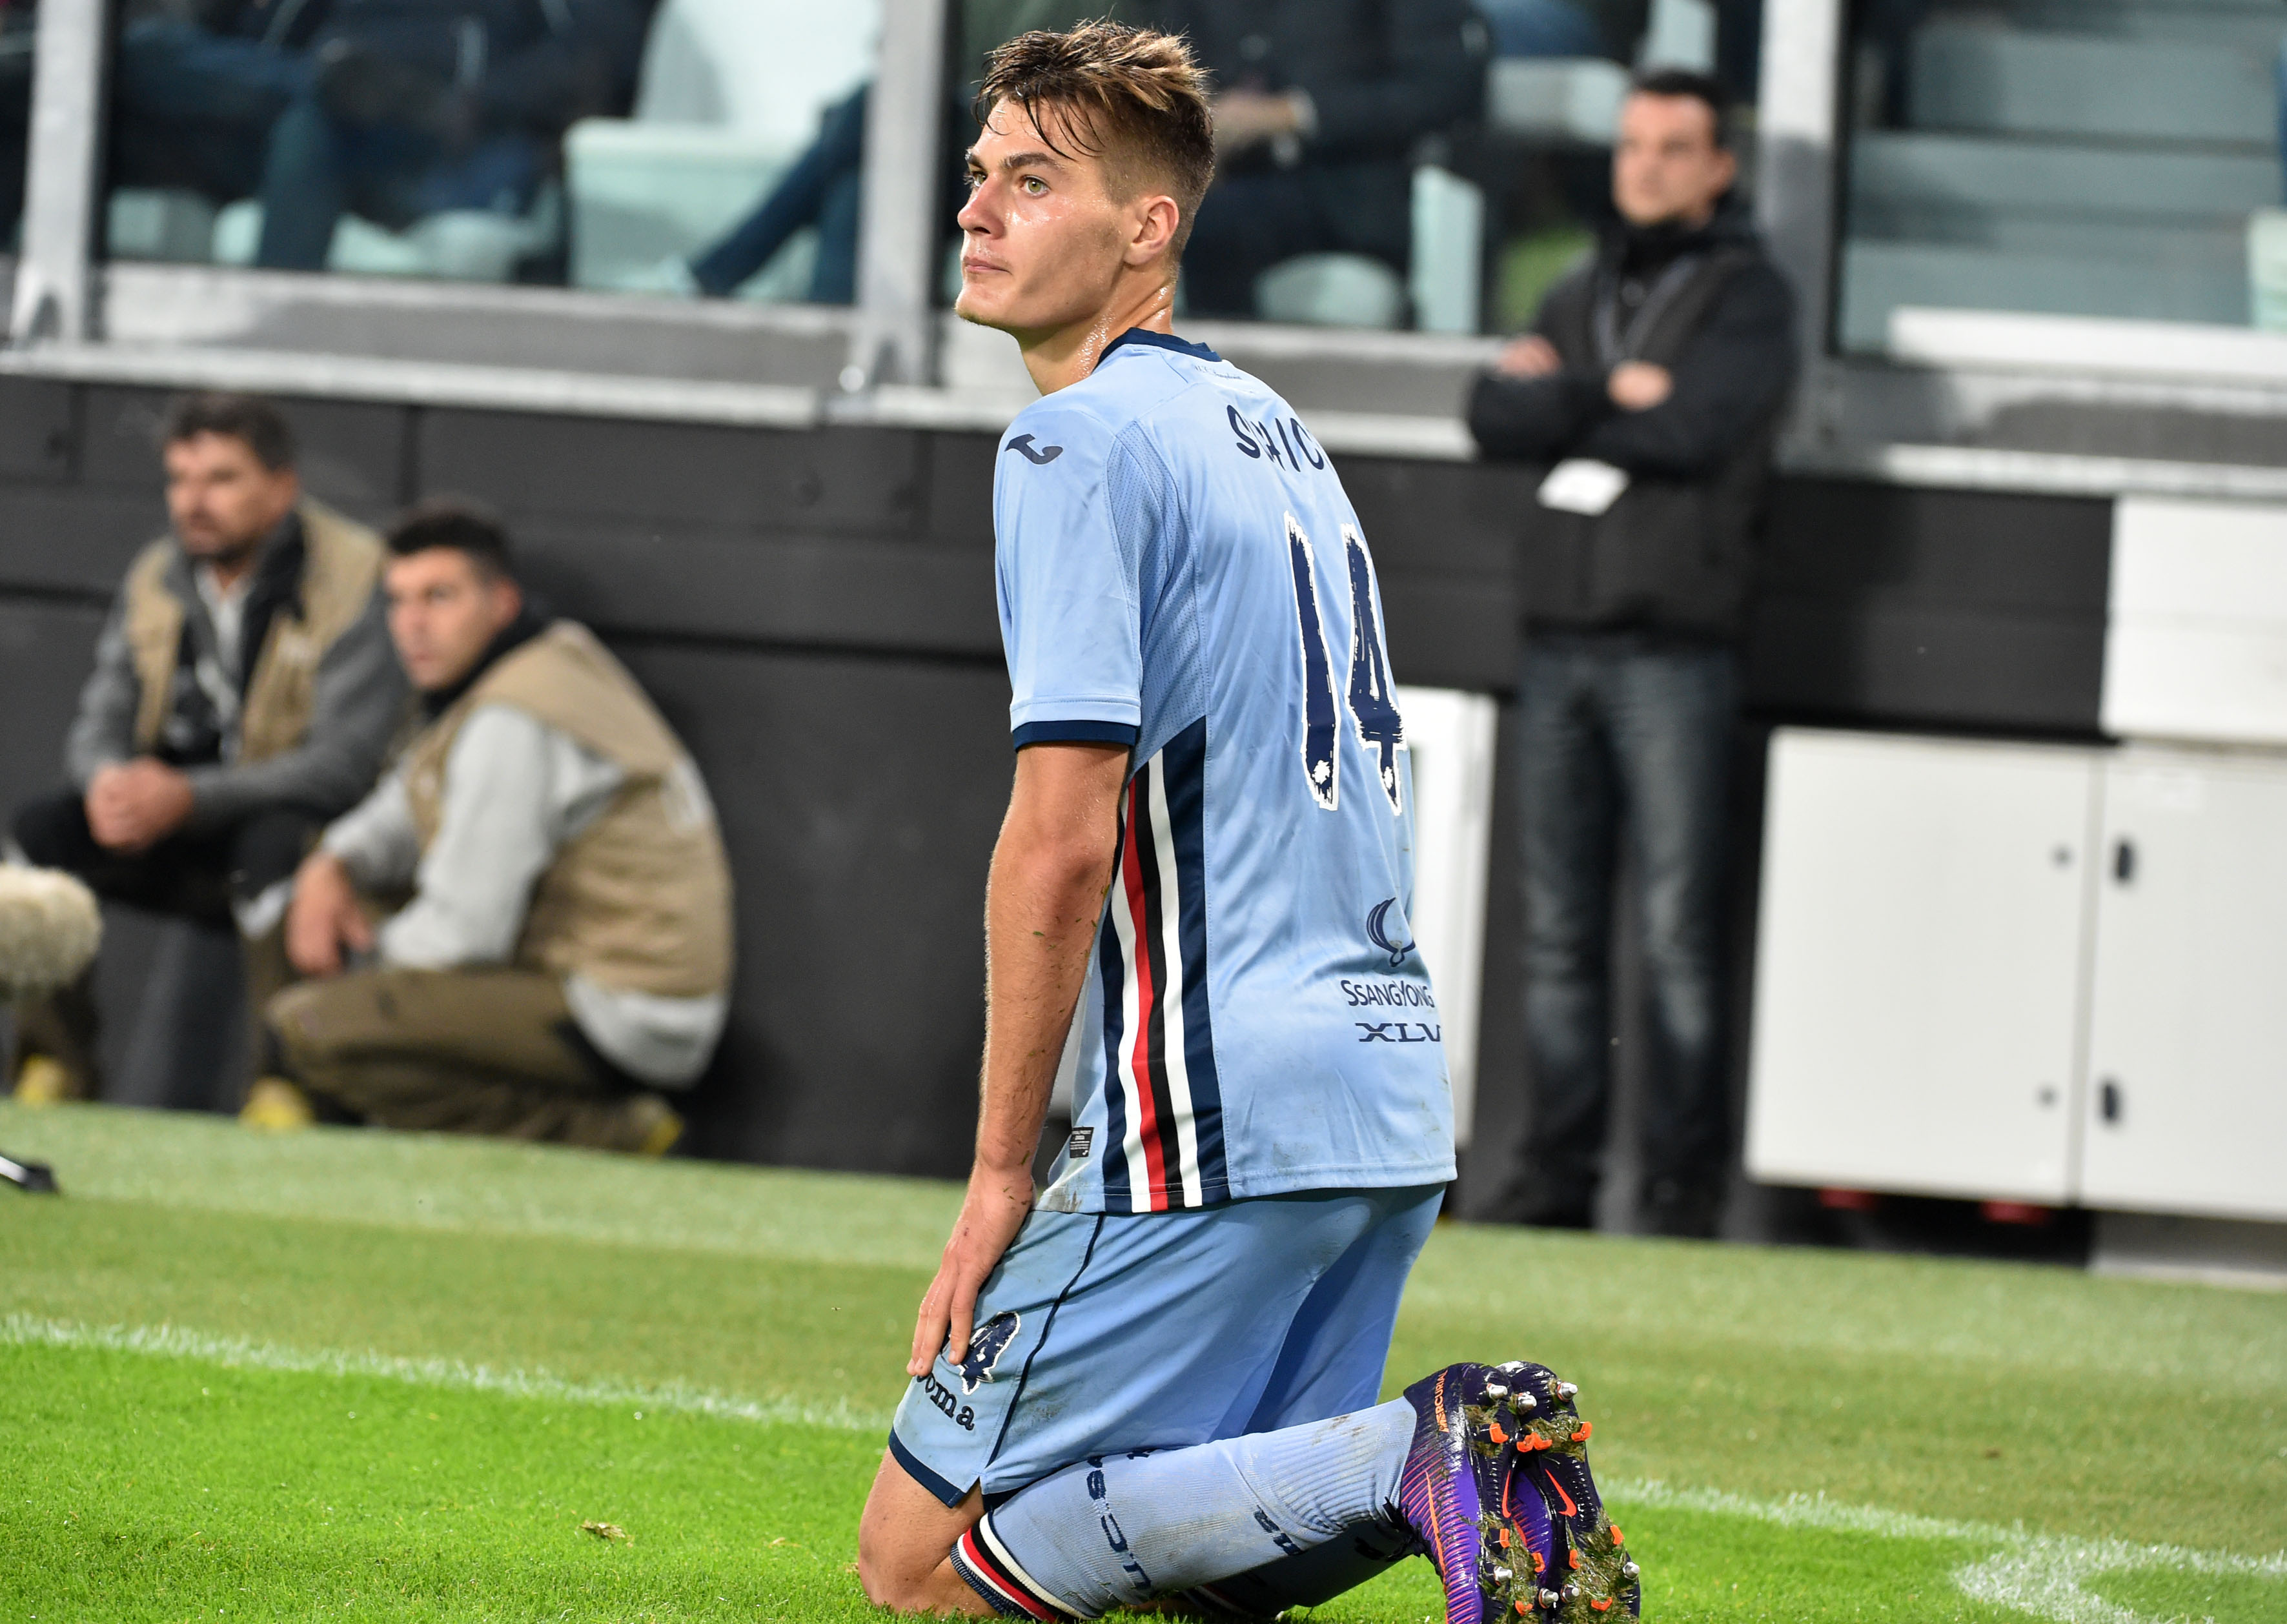 Schick could stay another year at Samp